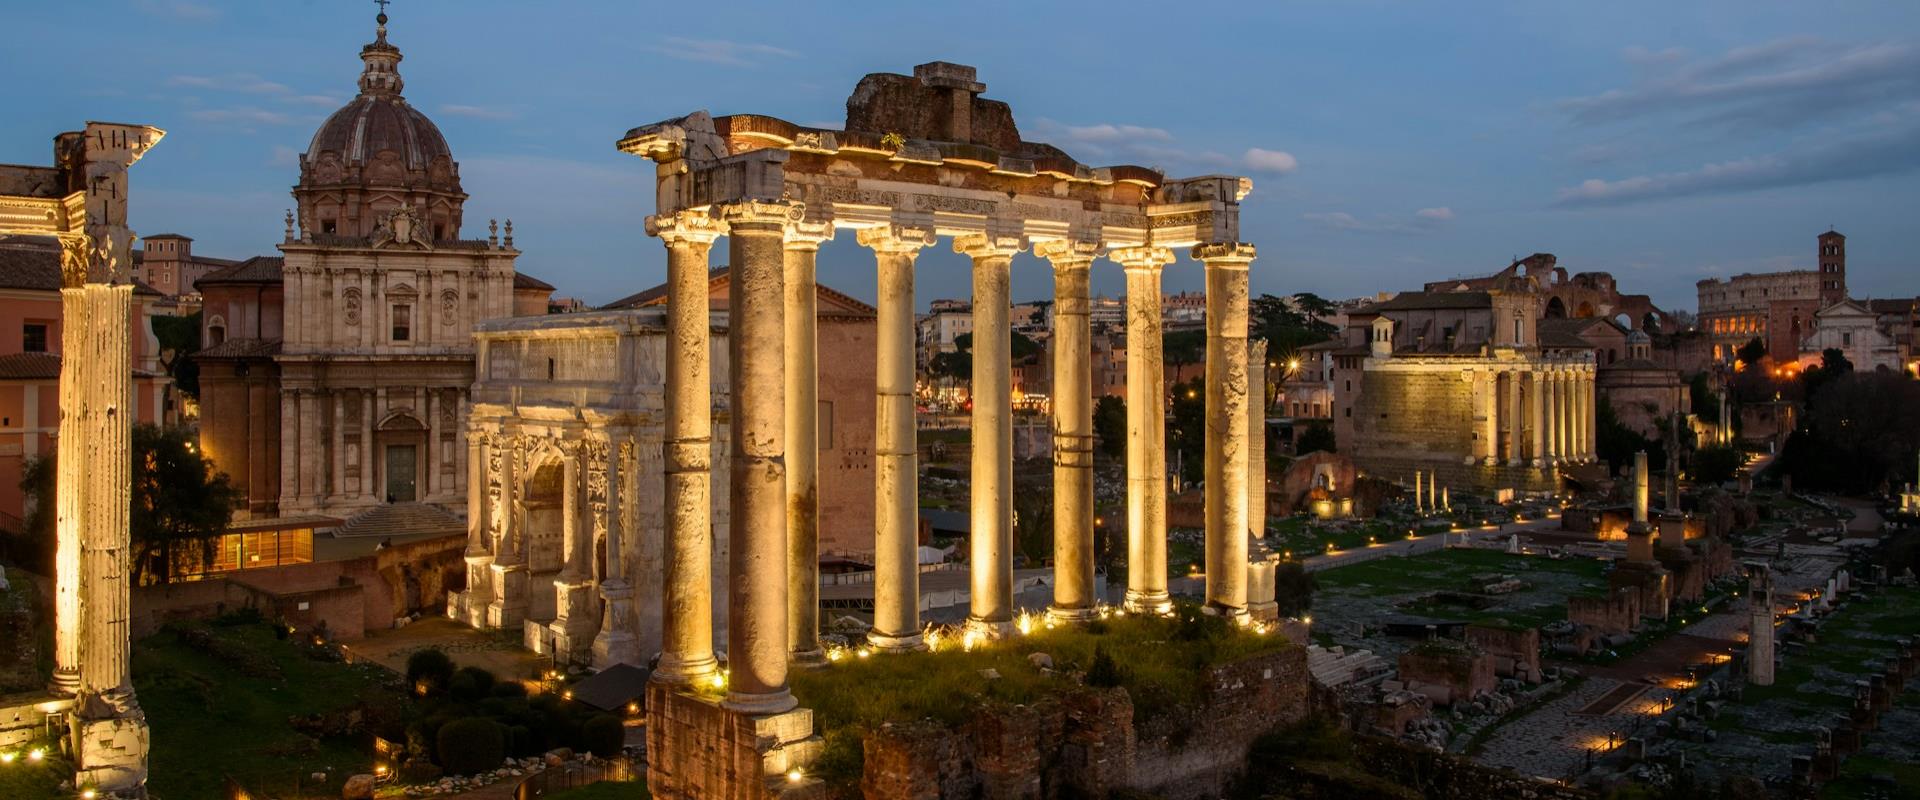 Discover Rome Package with Breakfast Included and Ticket to the Bioparco di Roma